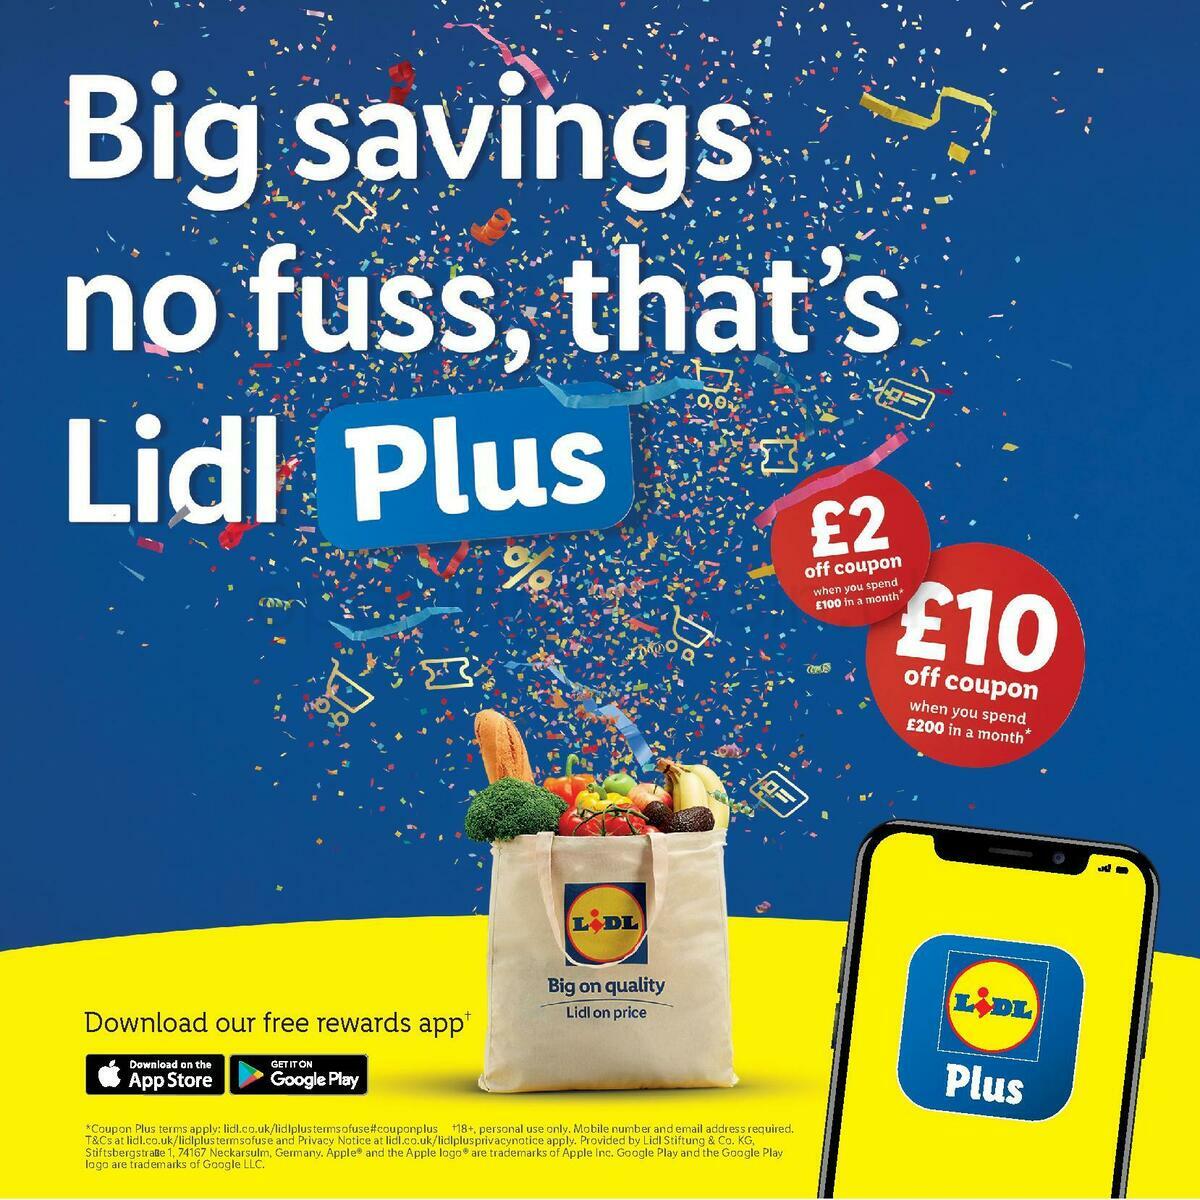 LIDL Autumn Magazine Scotland Offers from 10 September